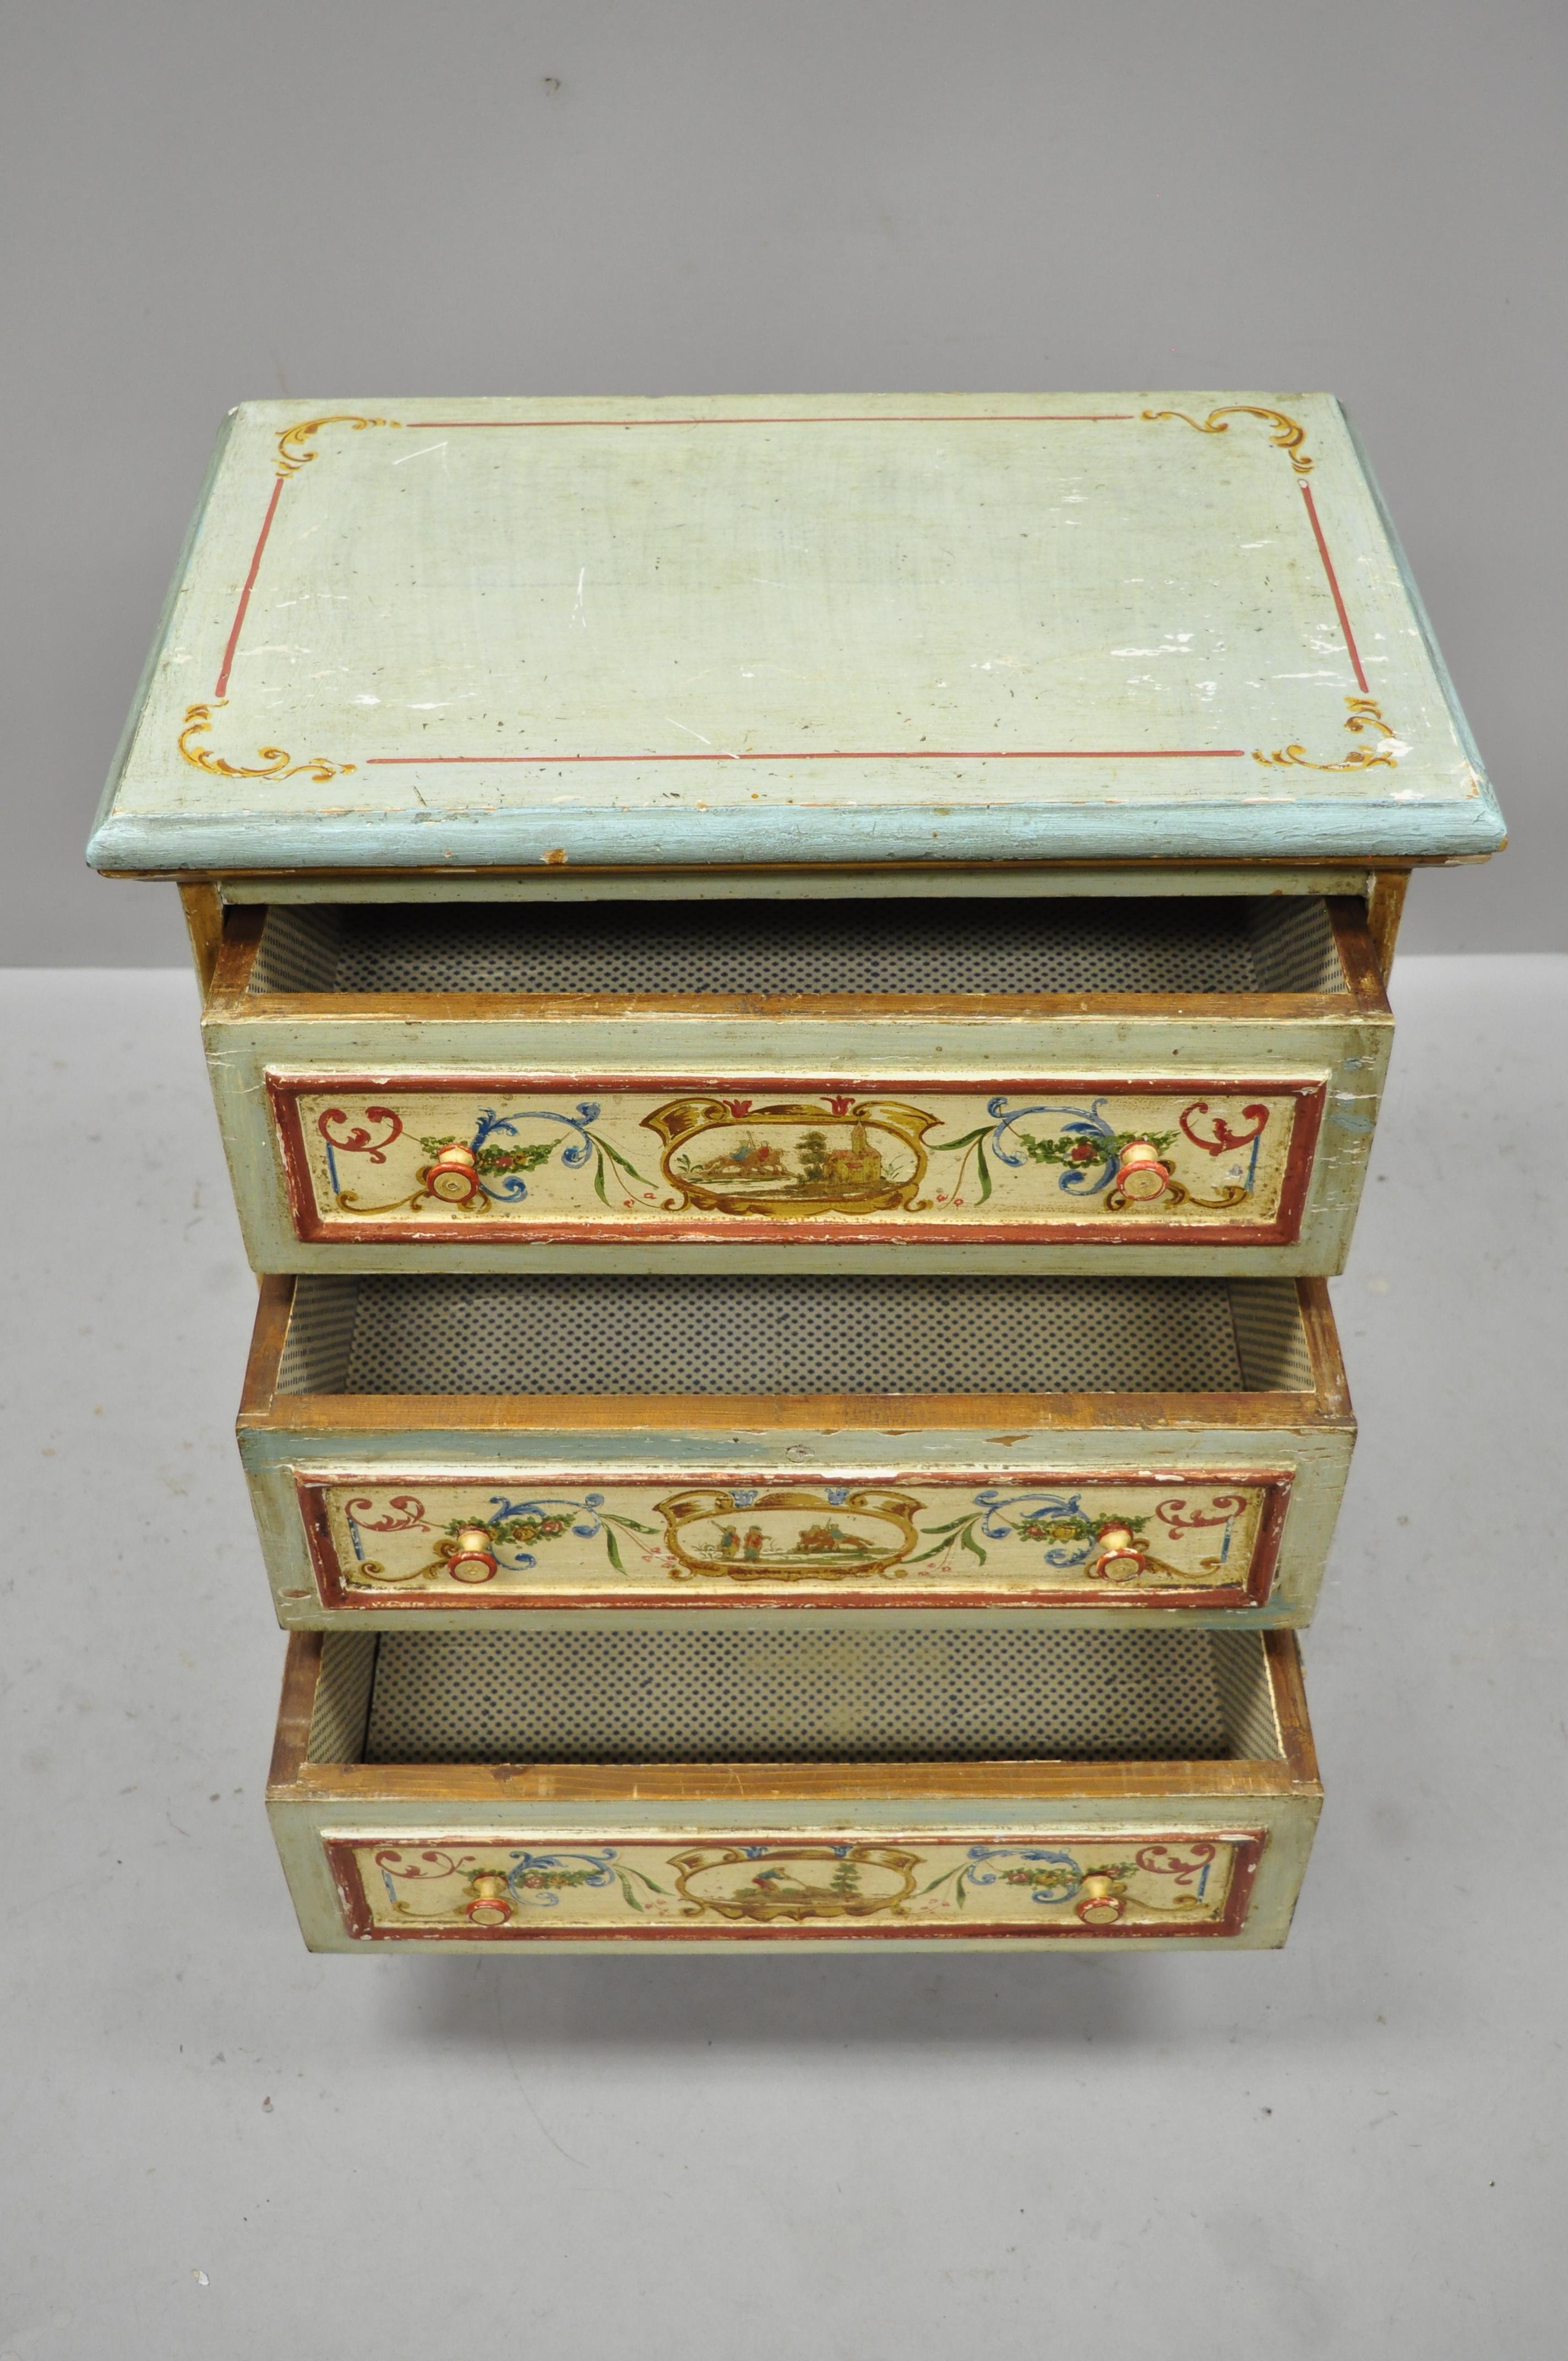 French Provincial Small Antique Italian Venetian Blue Painted 3-Drawer Commode Chest of Drawers